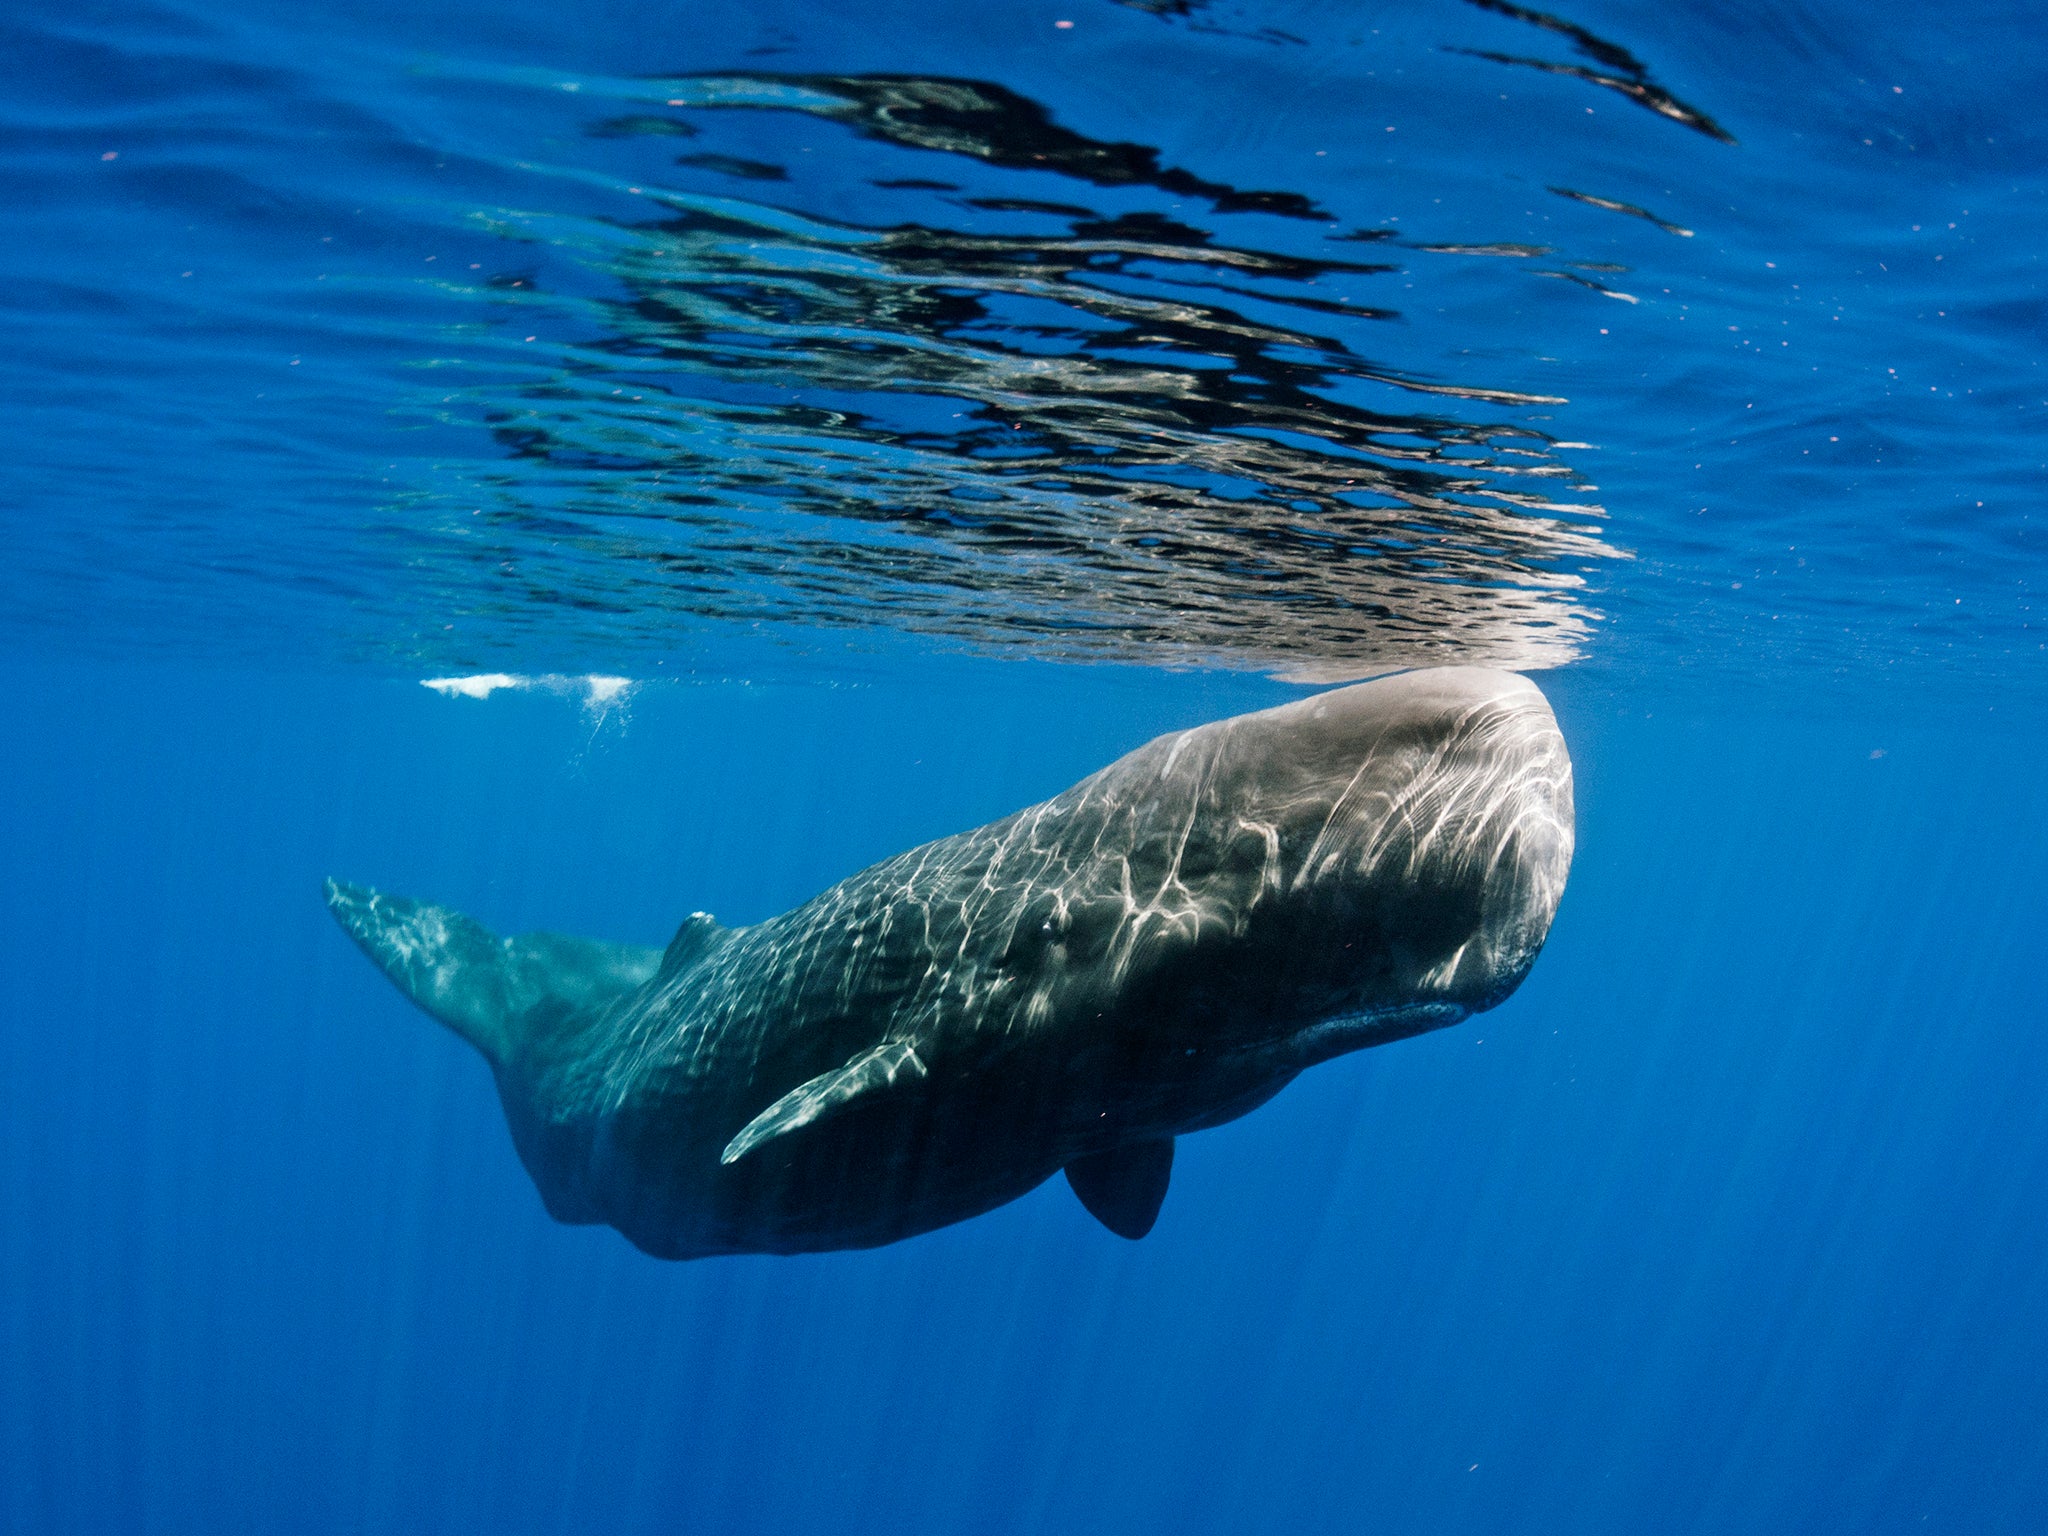 Sperm whales have actual dialects, which means that different populations have distinct vocalisations